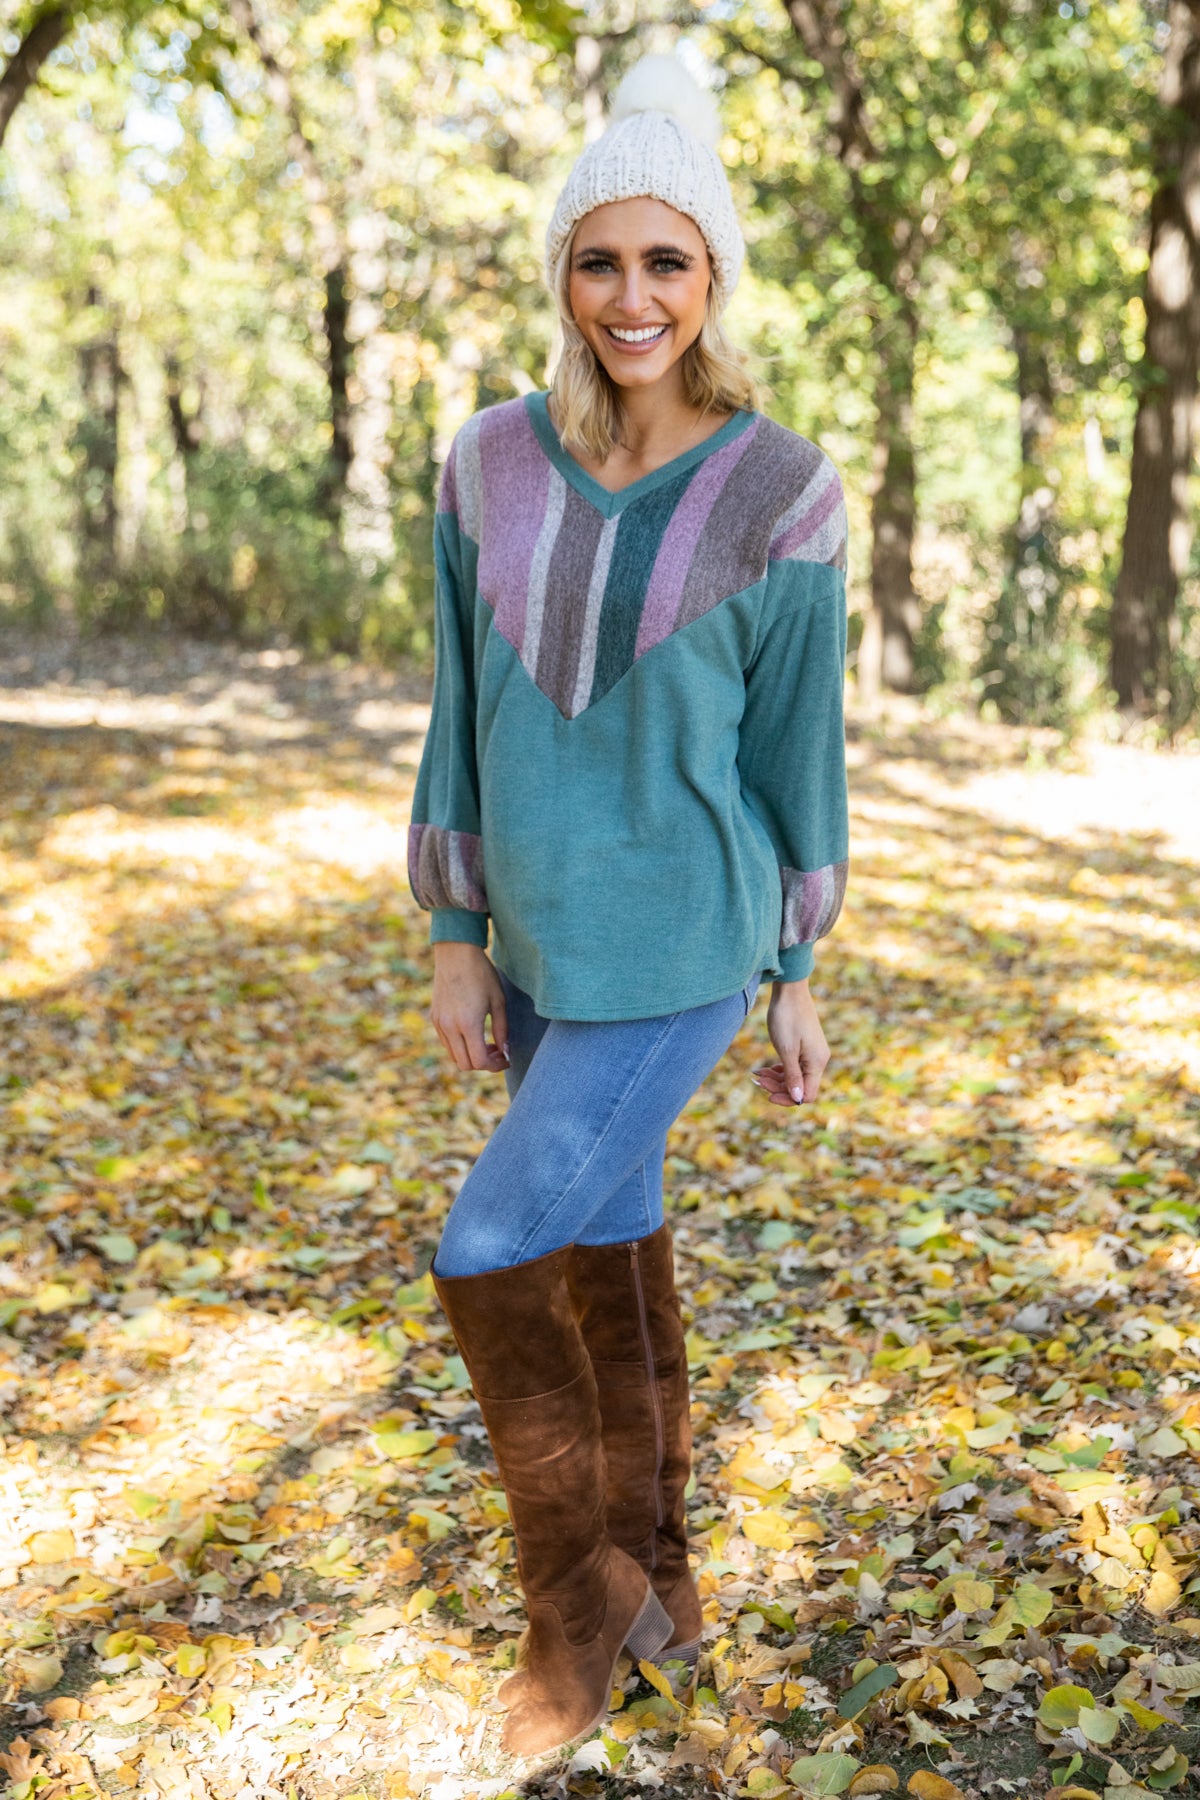 Emerald Green and Mauve Colorblock Chevron Top - Filly Flair